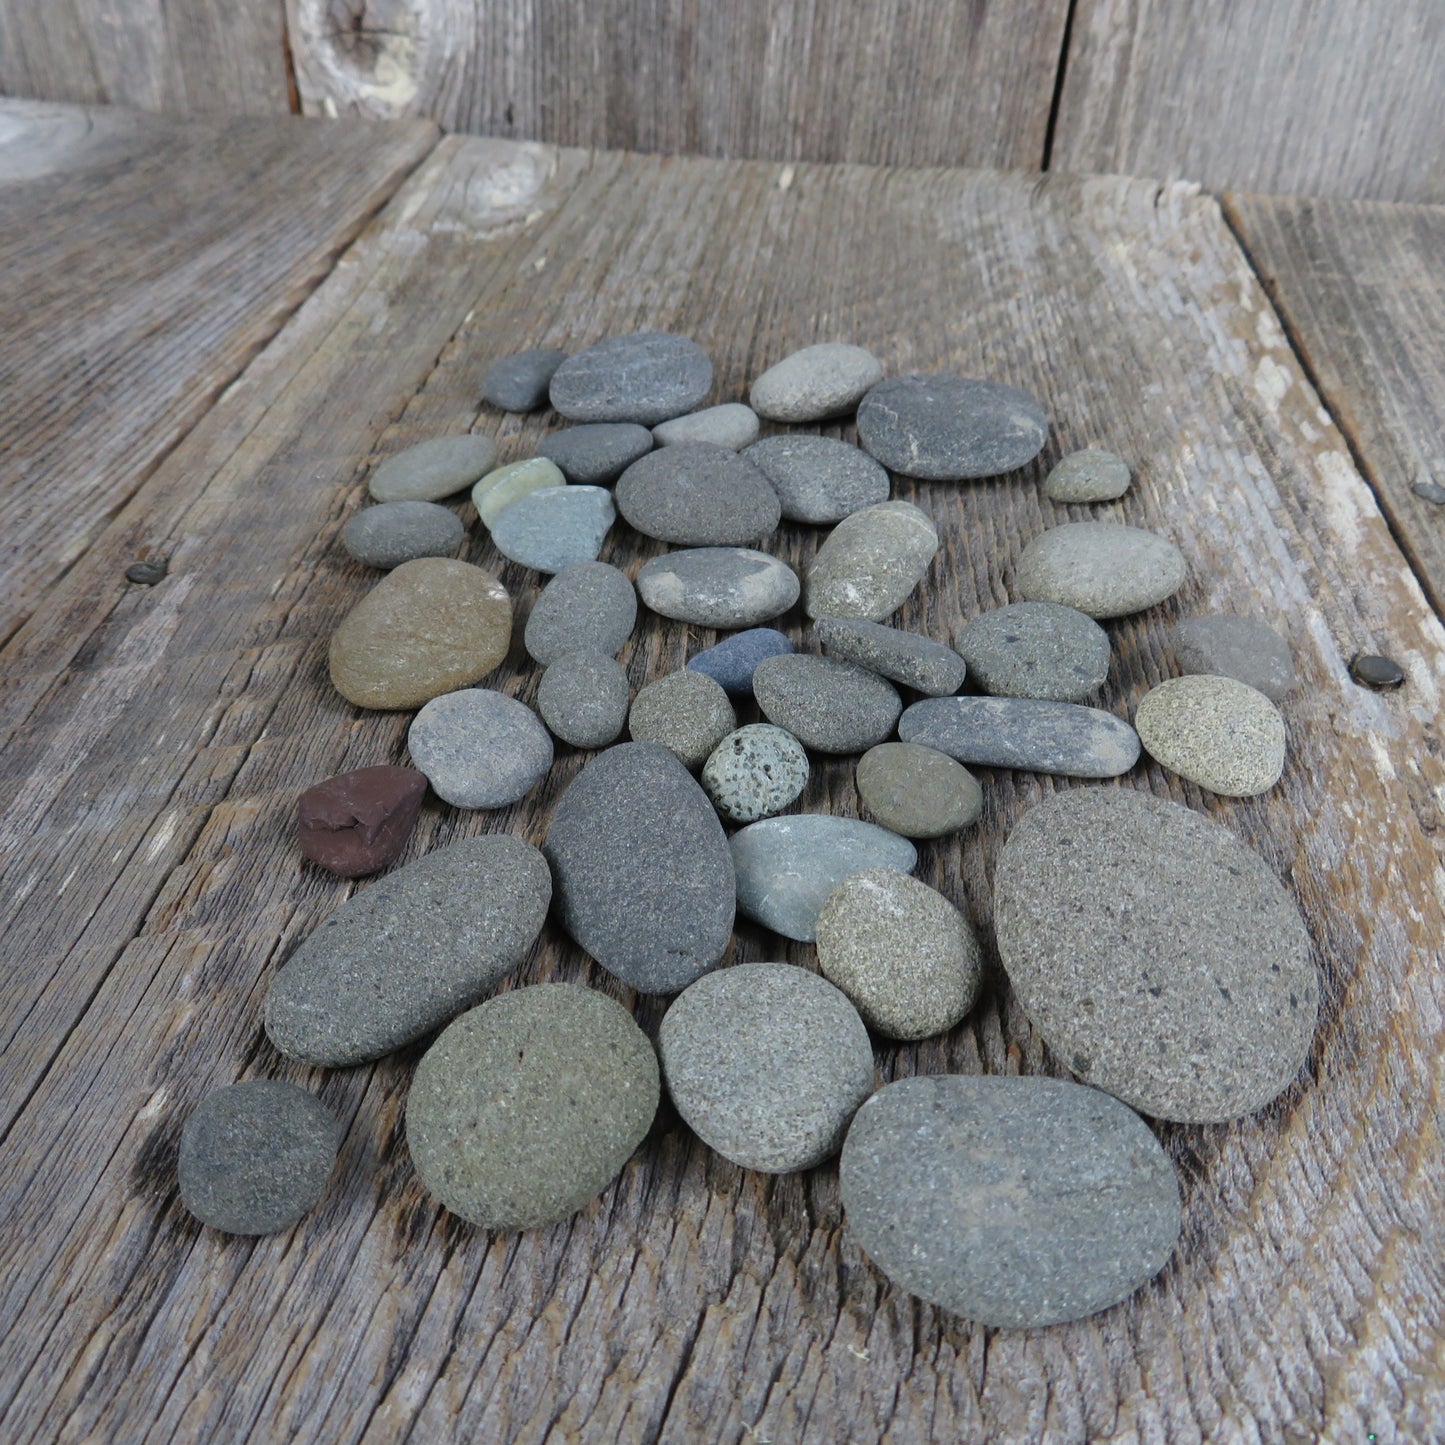 Garden Rock Path Stone Wall Ground Cover River Flat Stacking Rocks Craft Pebbles Fairy Village Miniature Dollhouse - At Grandma's Table